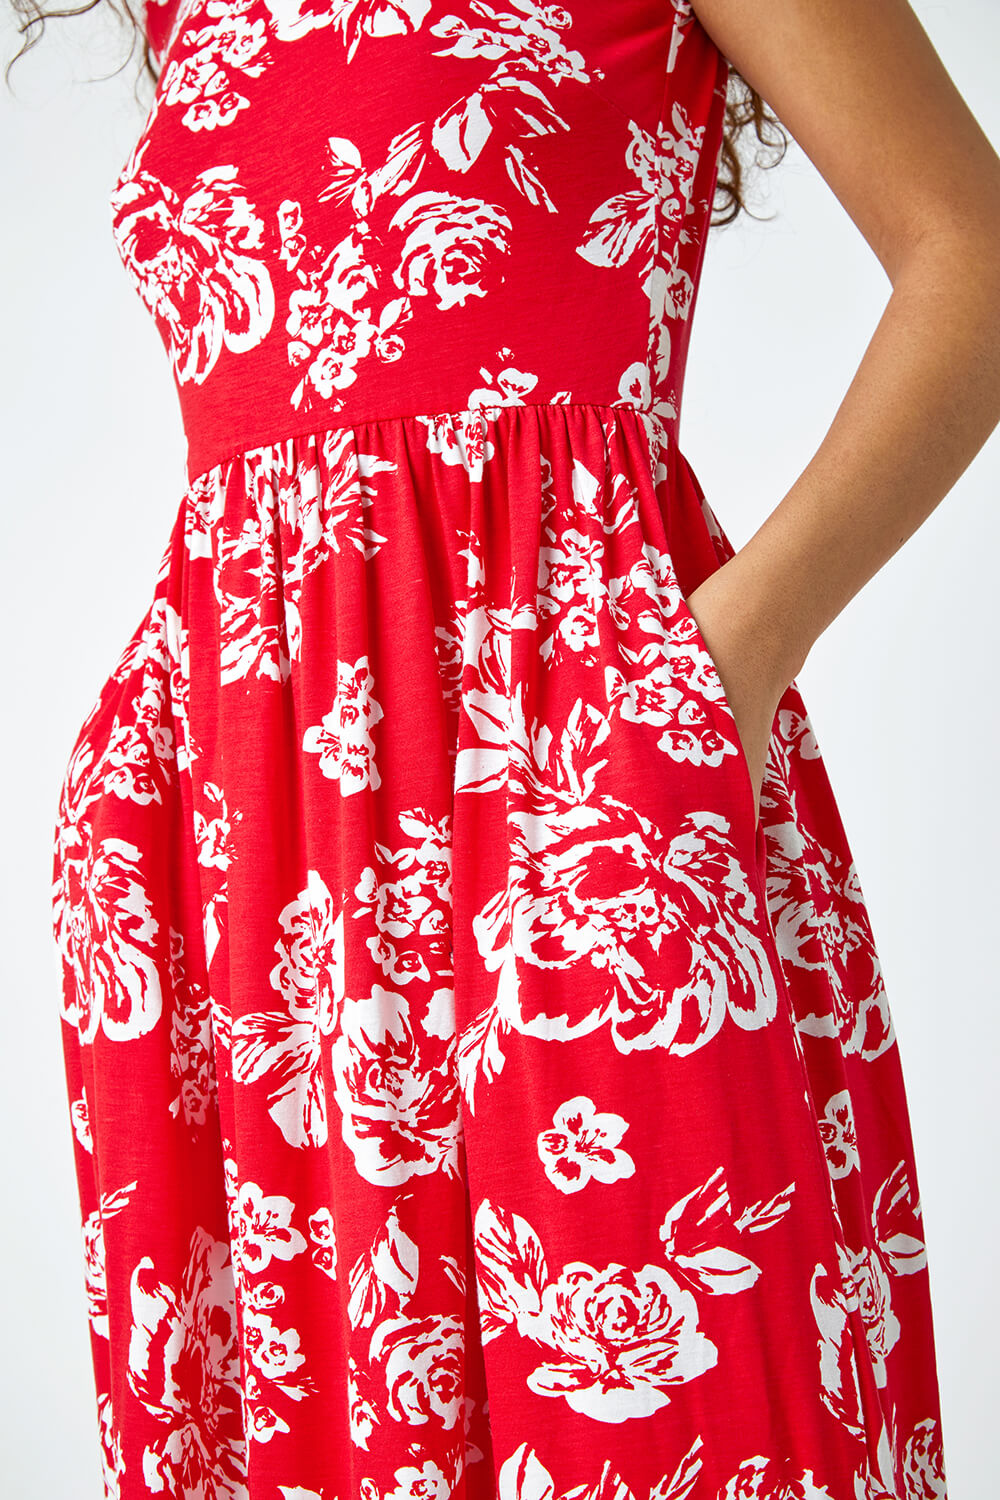 Red Floral Print Midi Stretch Dress, Image 5 of 5